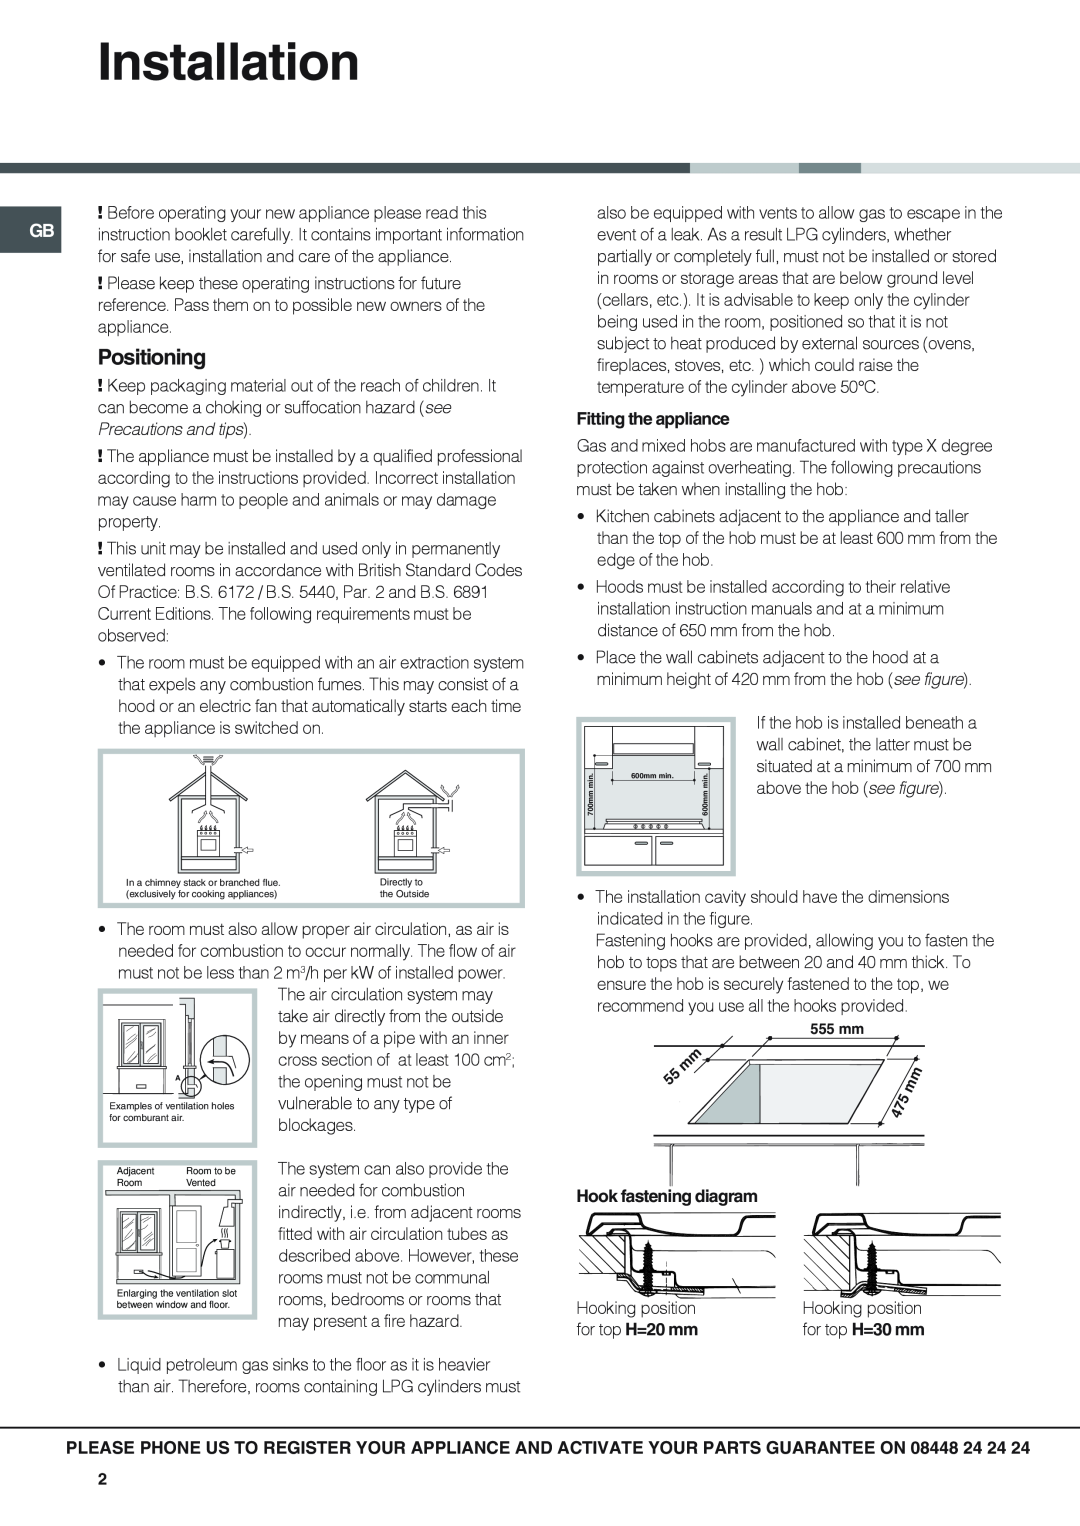 Hotpoint GP641X specifications Installation, Positioning 